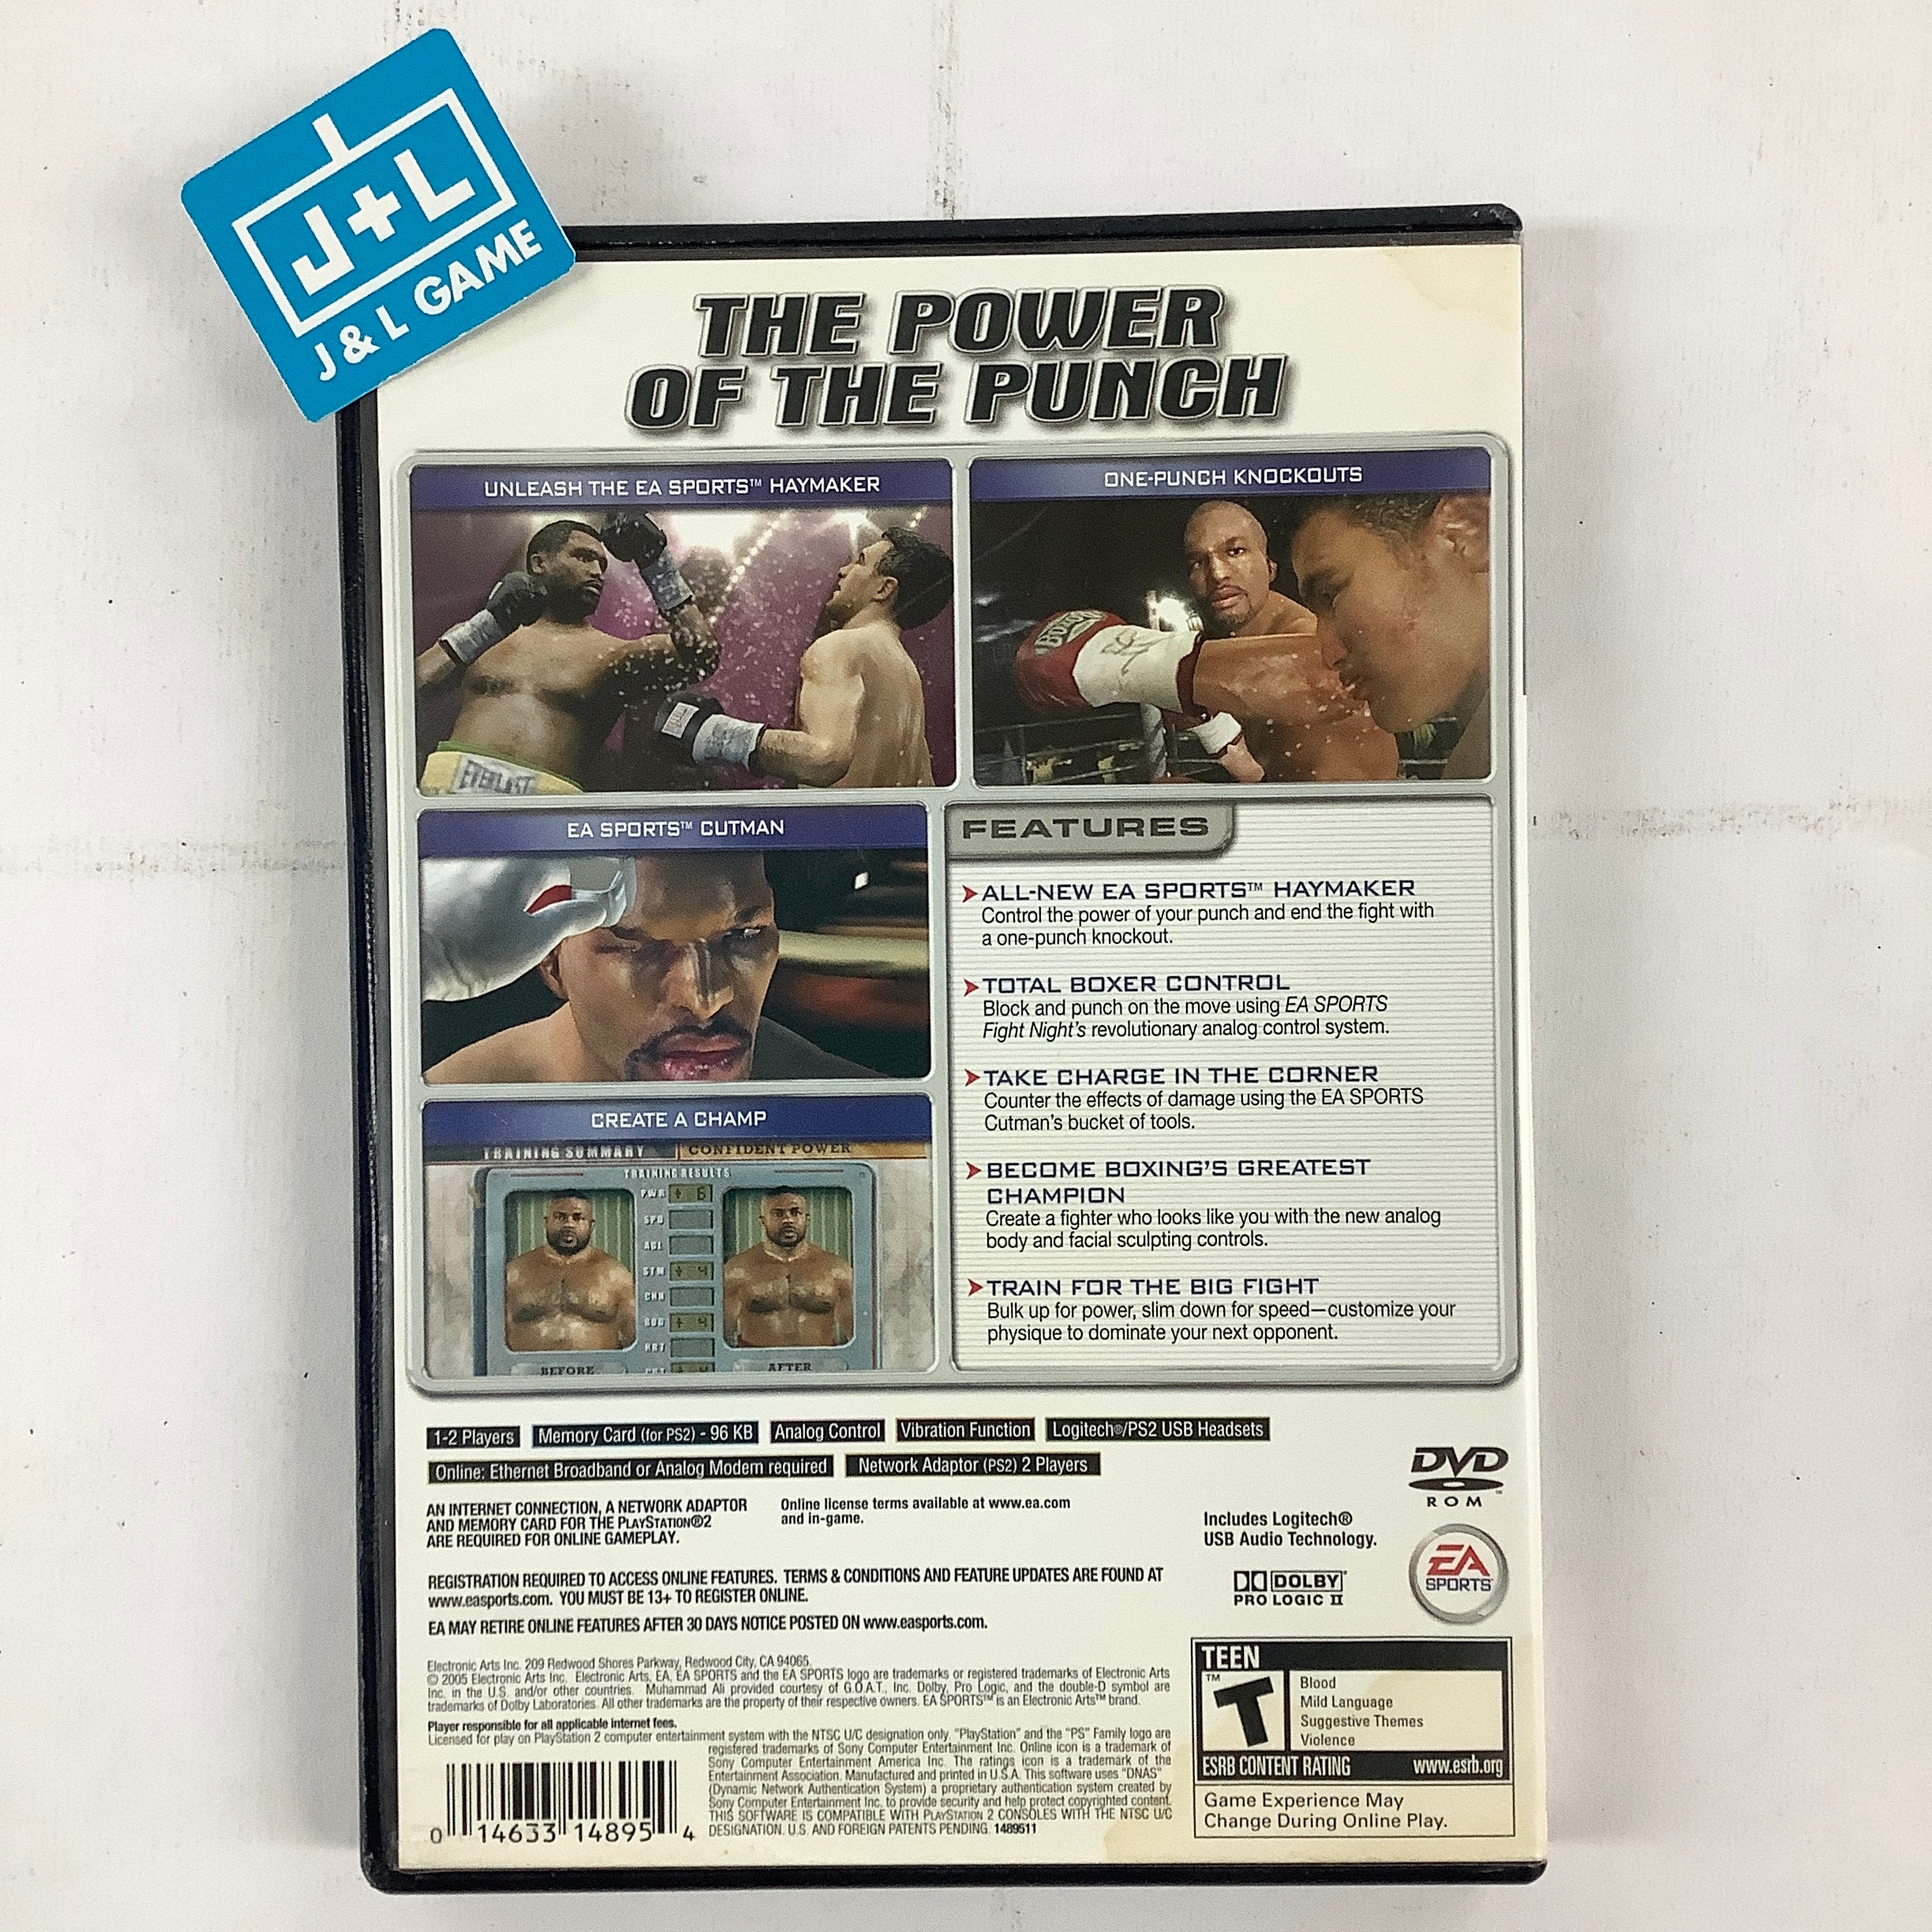 Fight Night Round 2 - (PS2) PlayStation 2 [Pre-Owned] Video Games EA Sports   